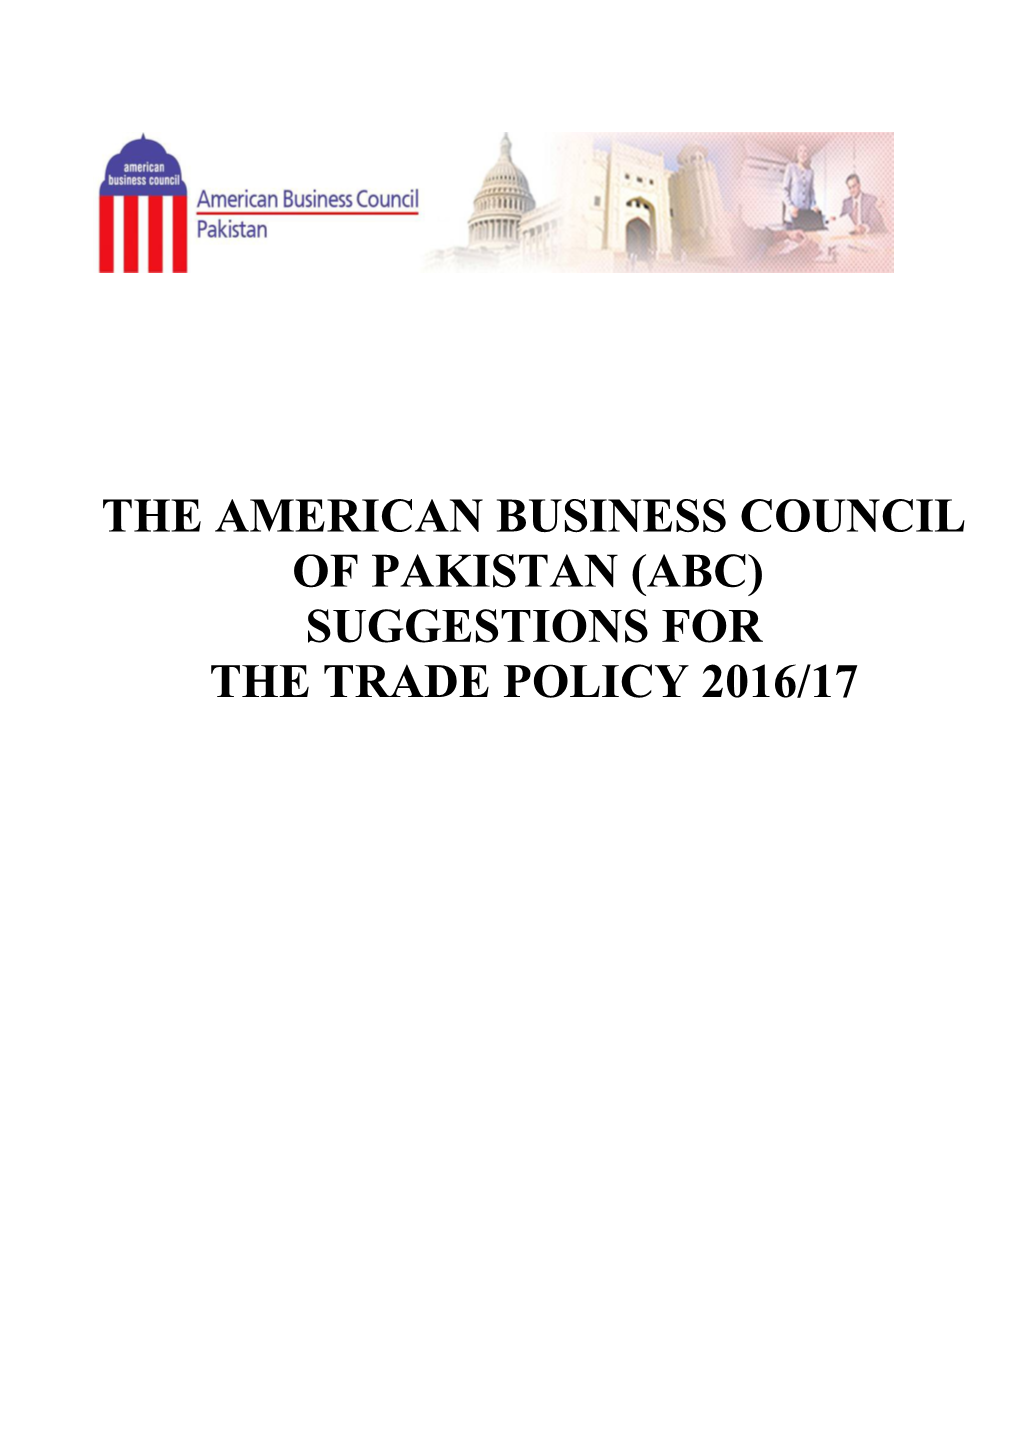 Abc Suggestions for Trade Policy 2008-09